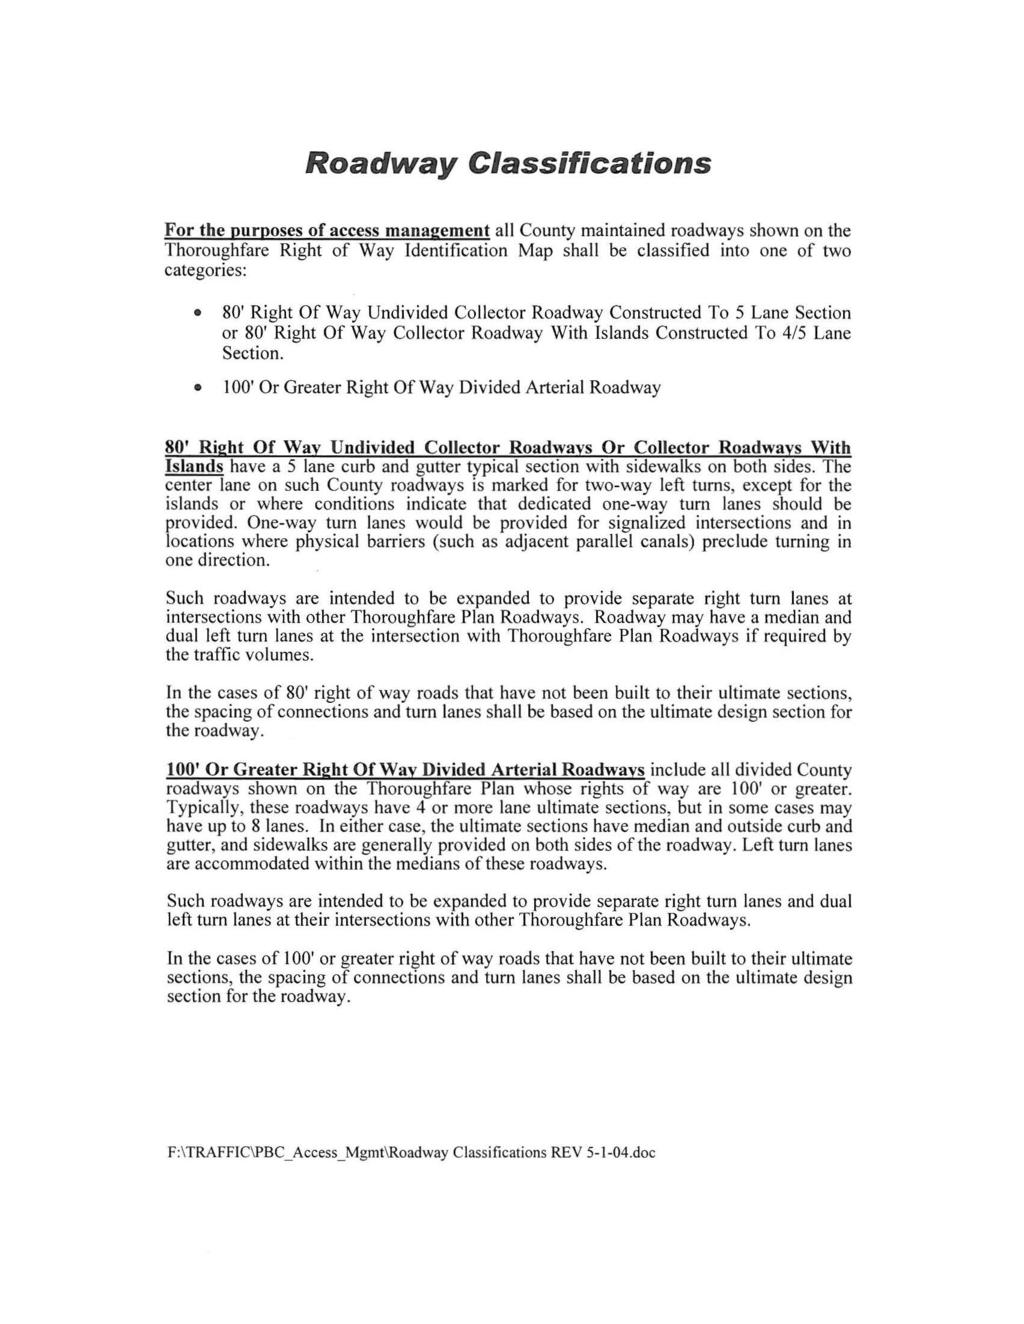 Roadway Classifications For the purposes of access management all County maintained roadways shown on the Thoroughfare Right of Way Identification Map shall be classified into one of two categories: